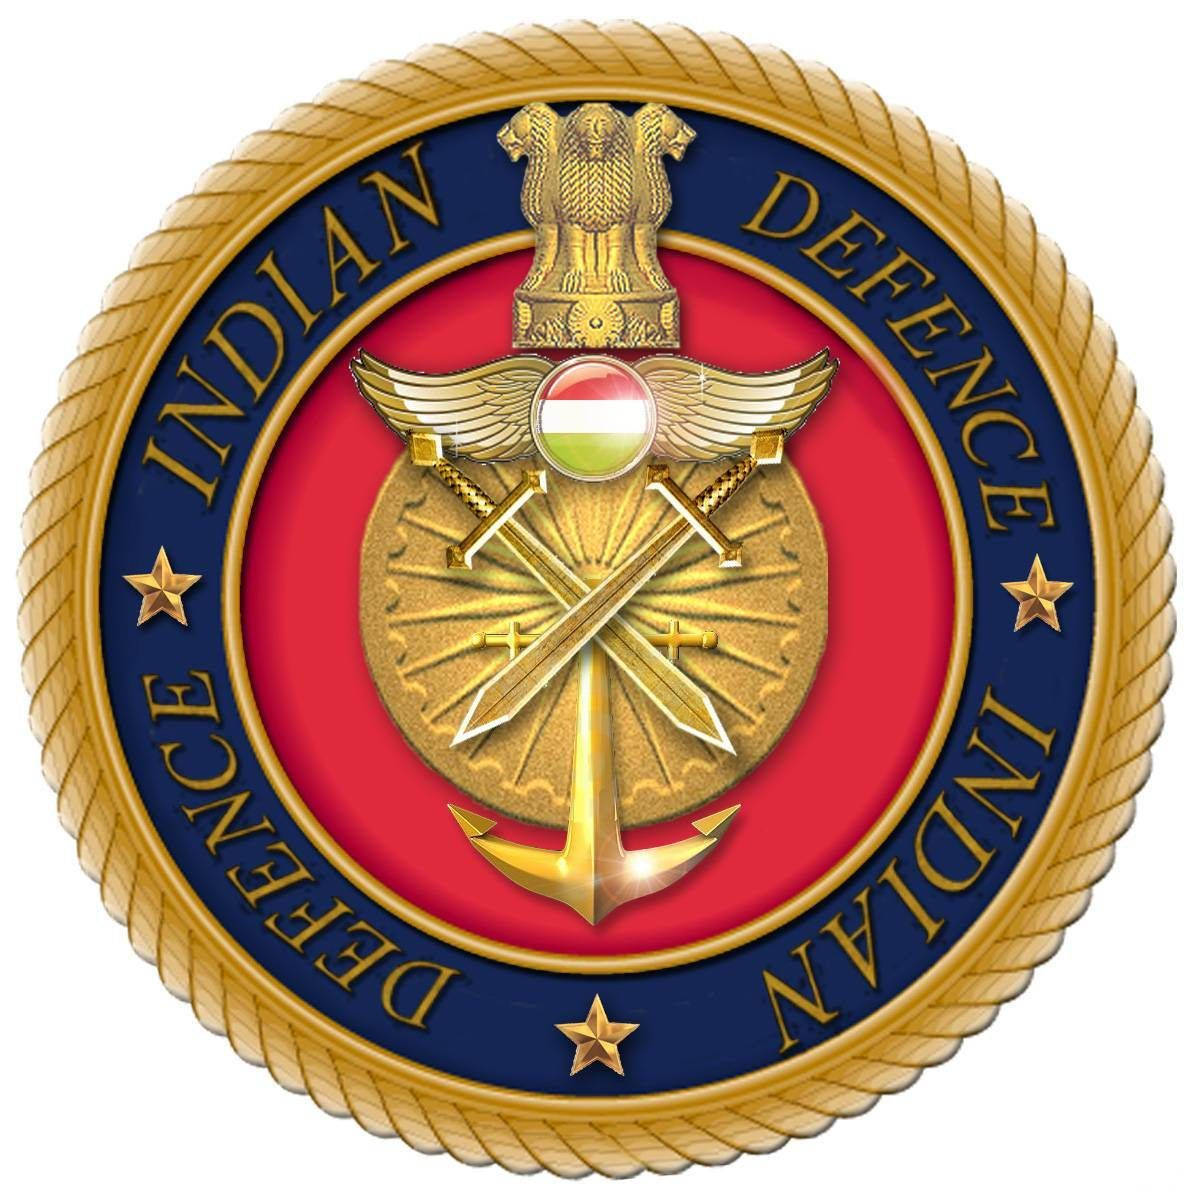 Captivating Power: Indian Army Logo Featuring Two Swords And Anchor